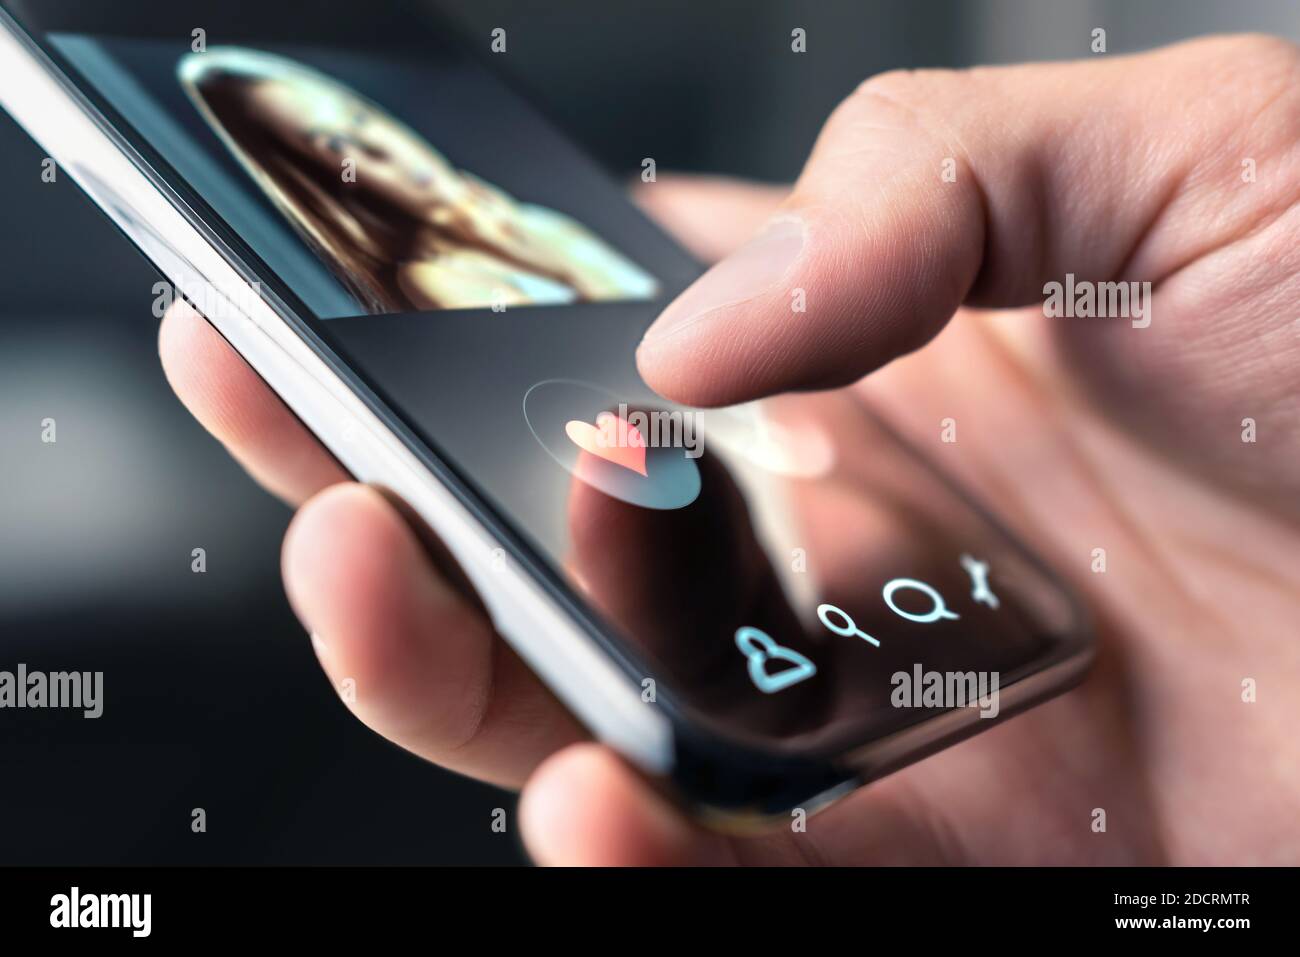 Online dating app in mobile phone. Like or swipe to match. Single man looking for love and relationship with smartphone. Woman with beautiful profile. Stock Photo